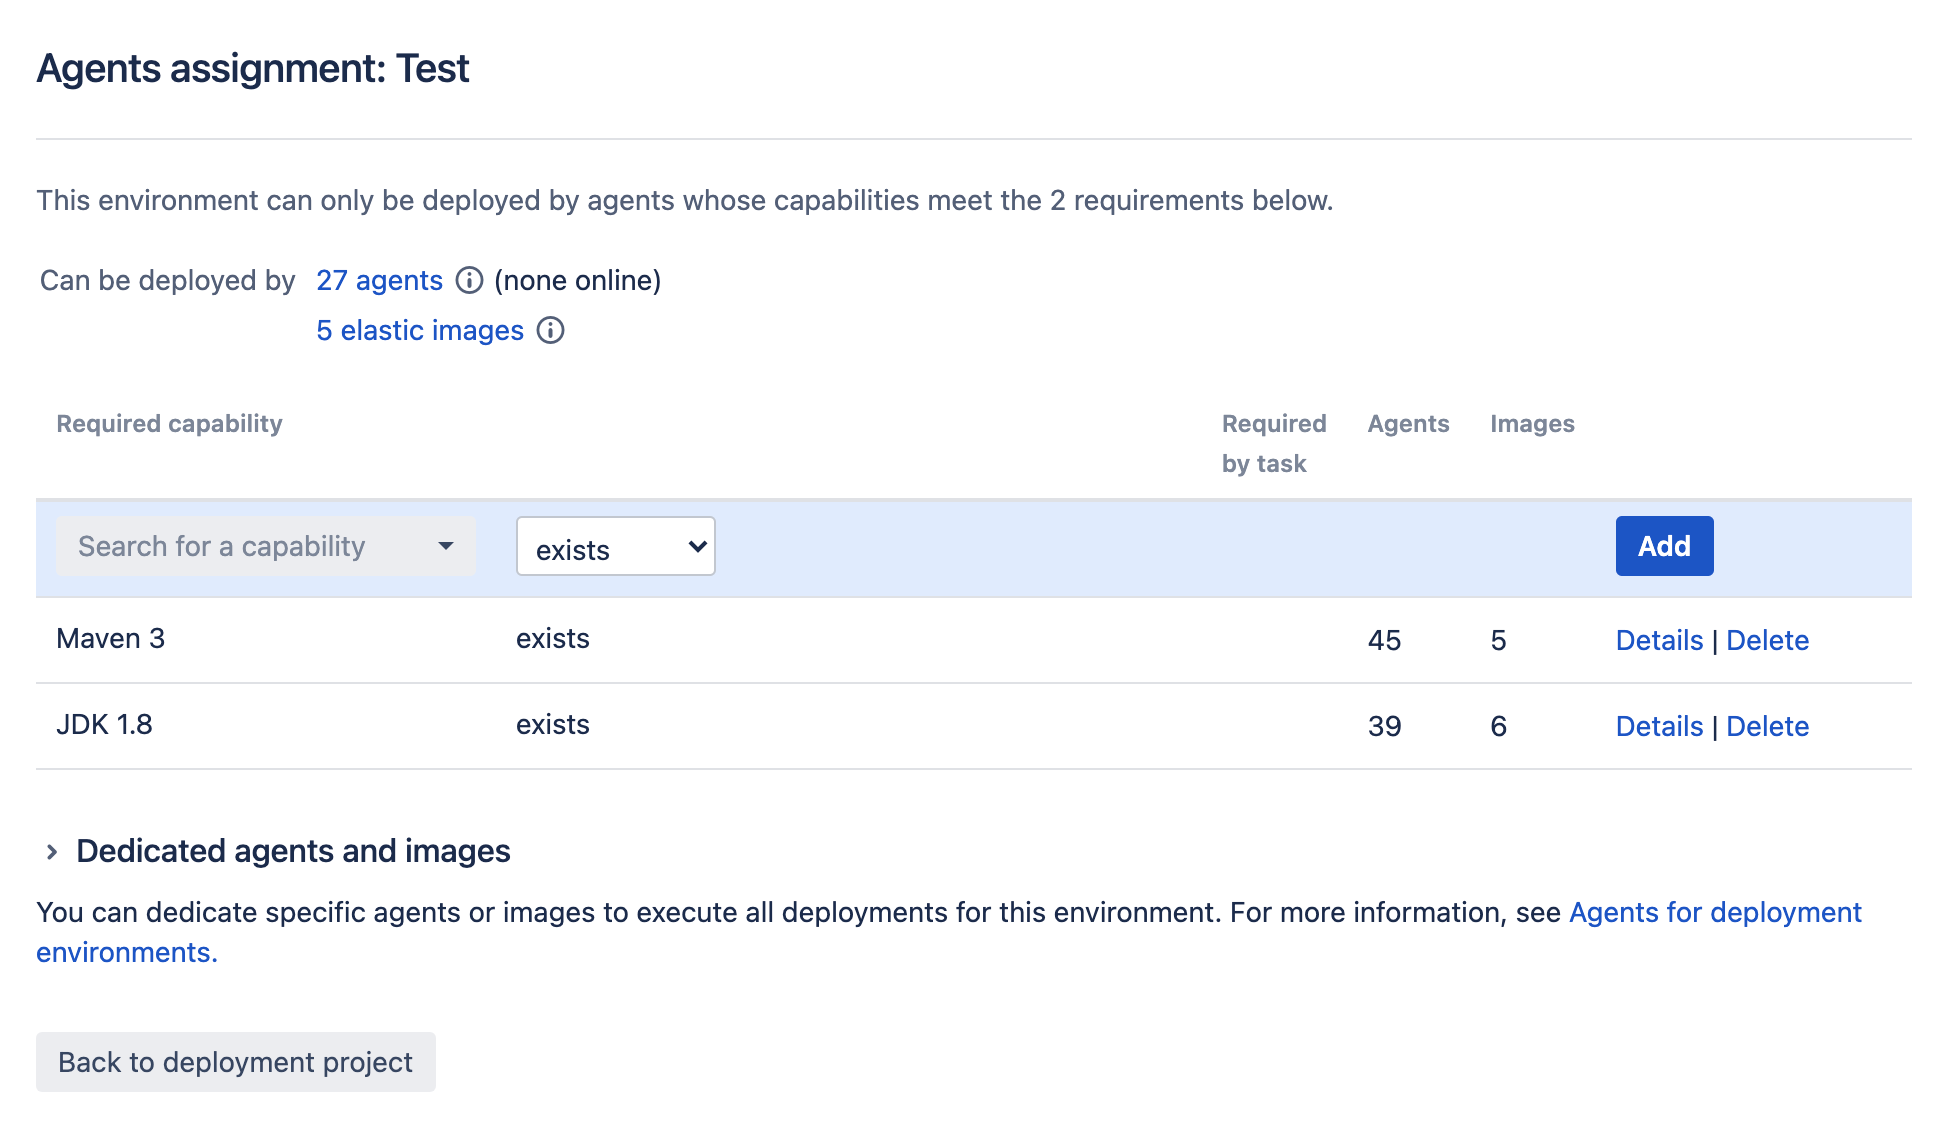 Assign agents for deployment environment screen